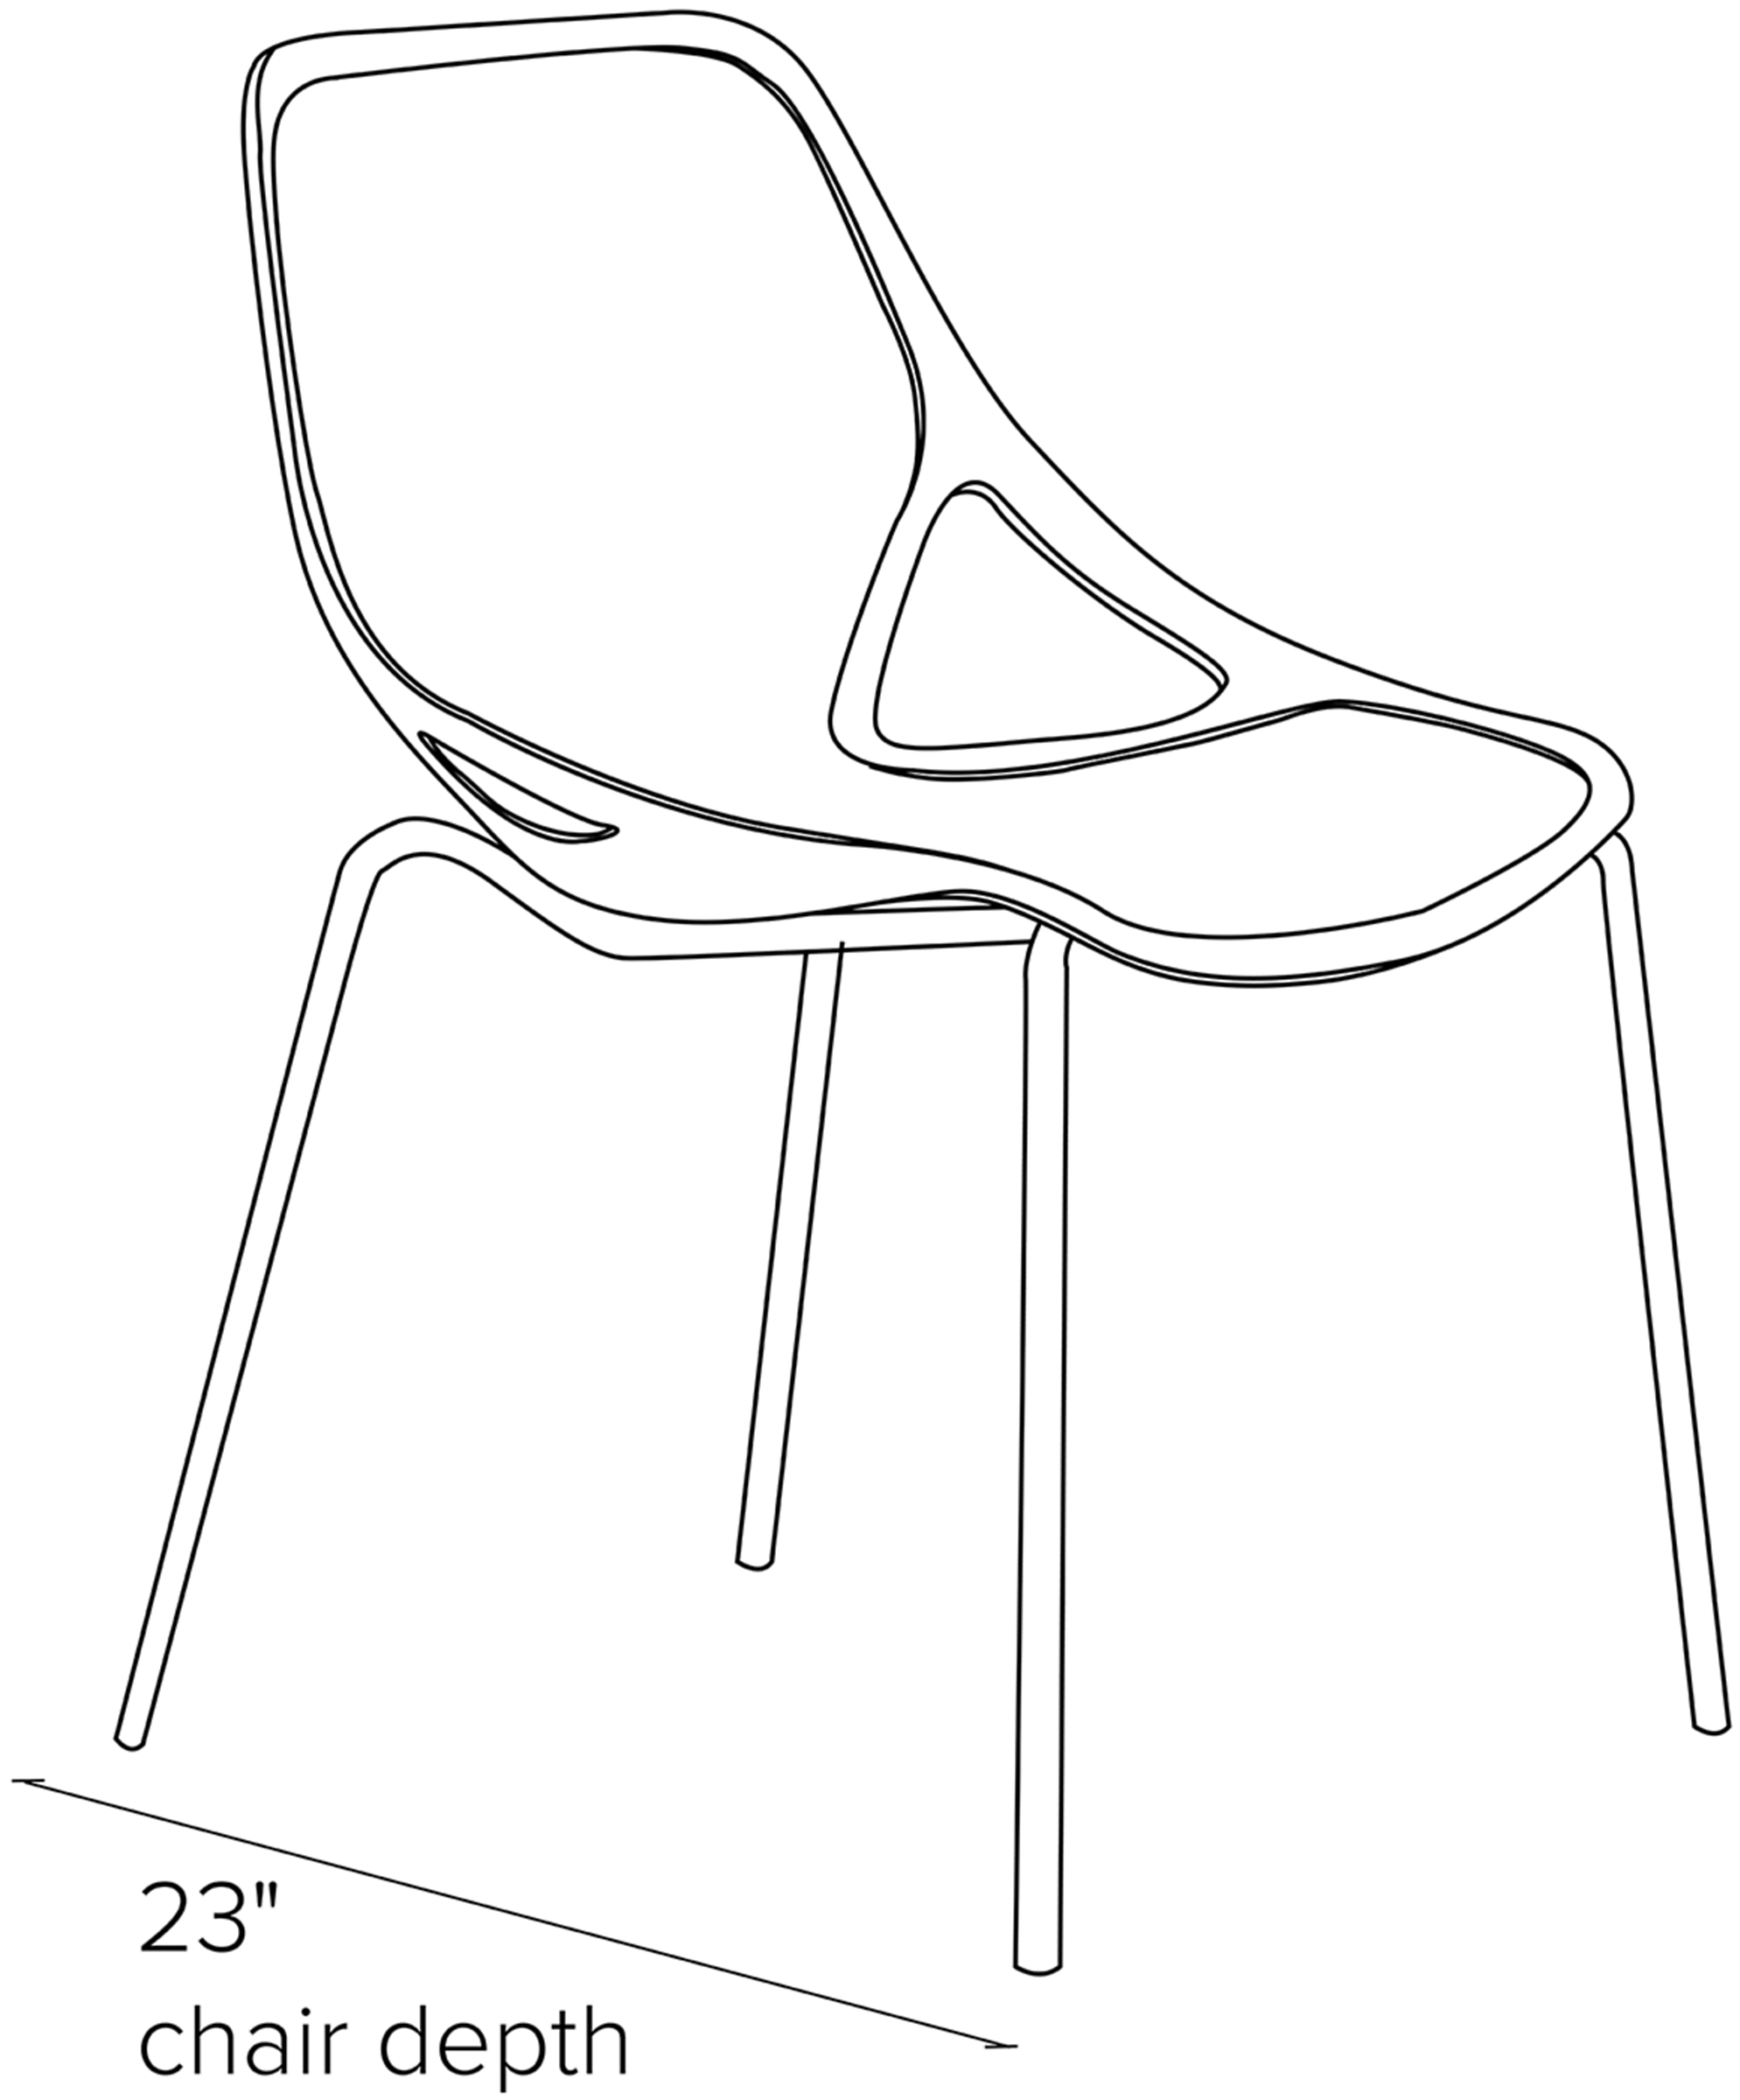 Side view dimension illustration of Caprice side chair.